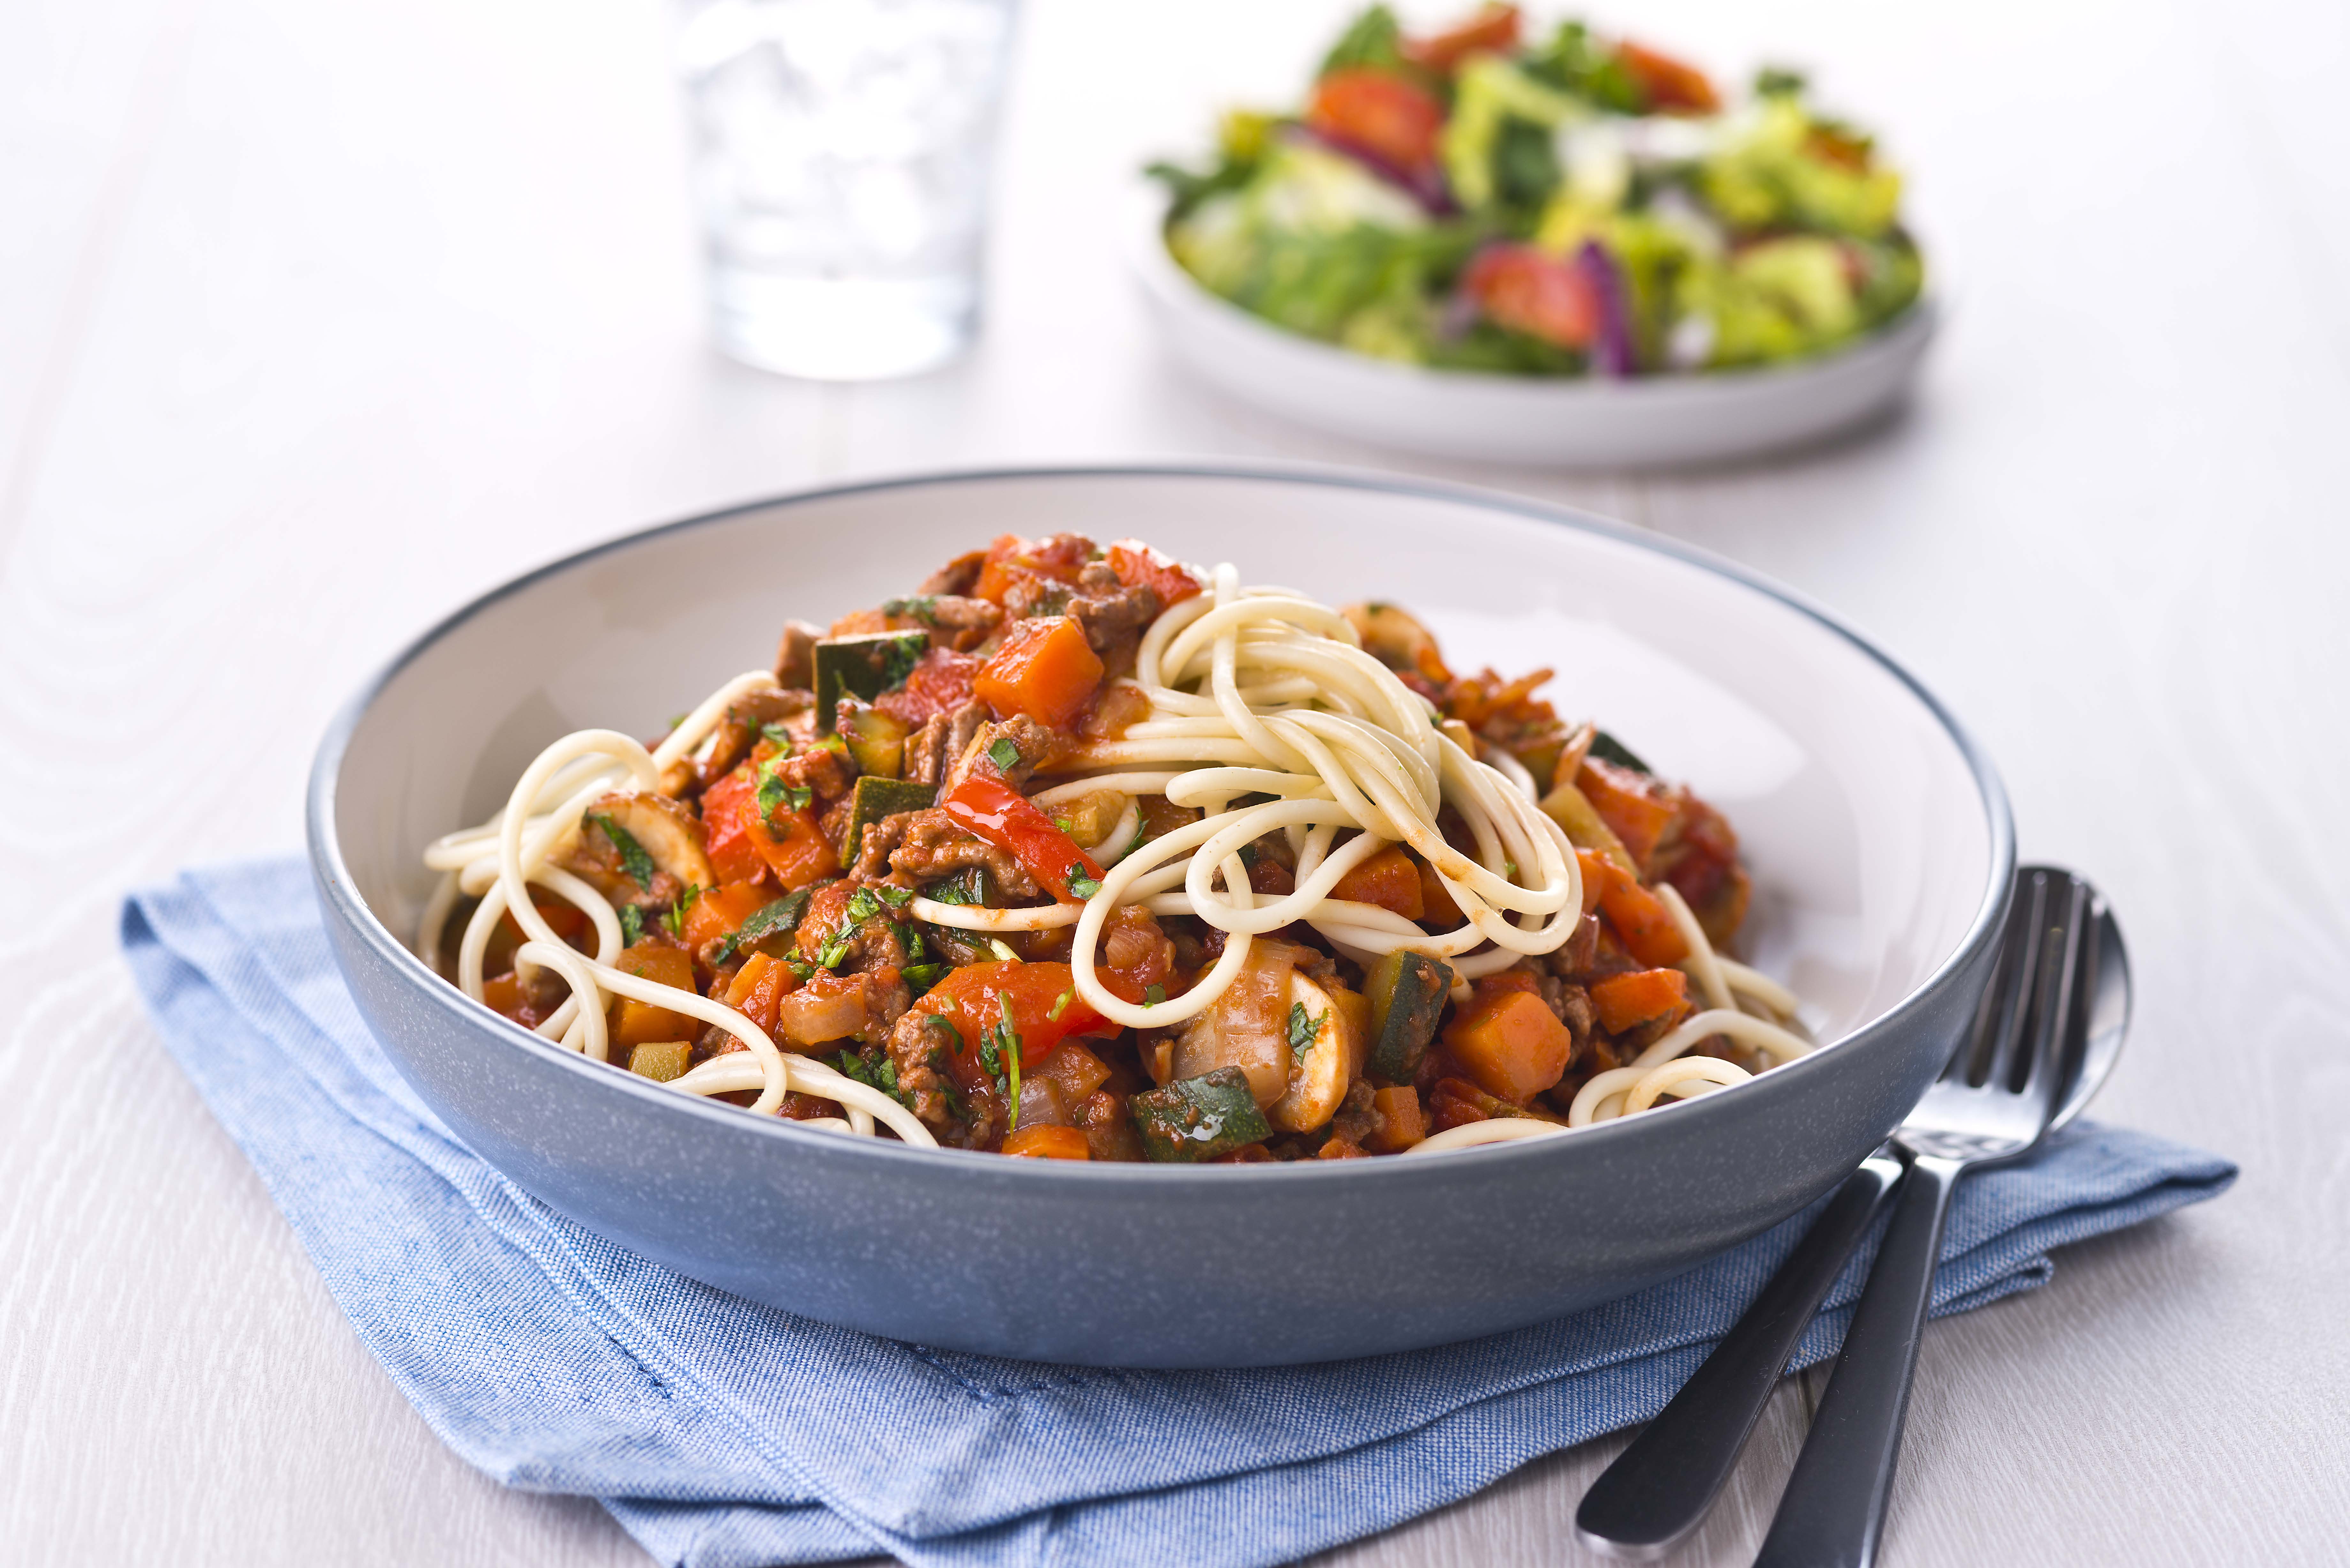 A dish of spaghetti bolognaise with a green salad side dish